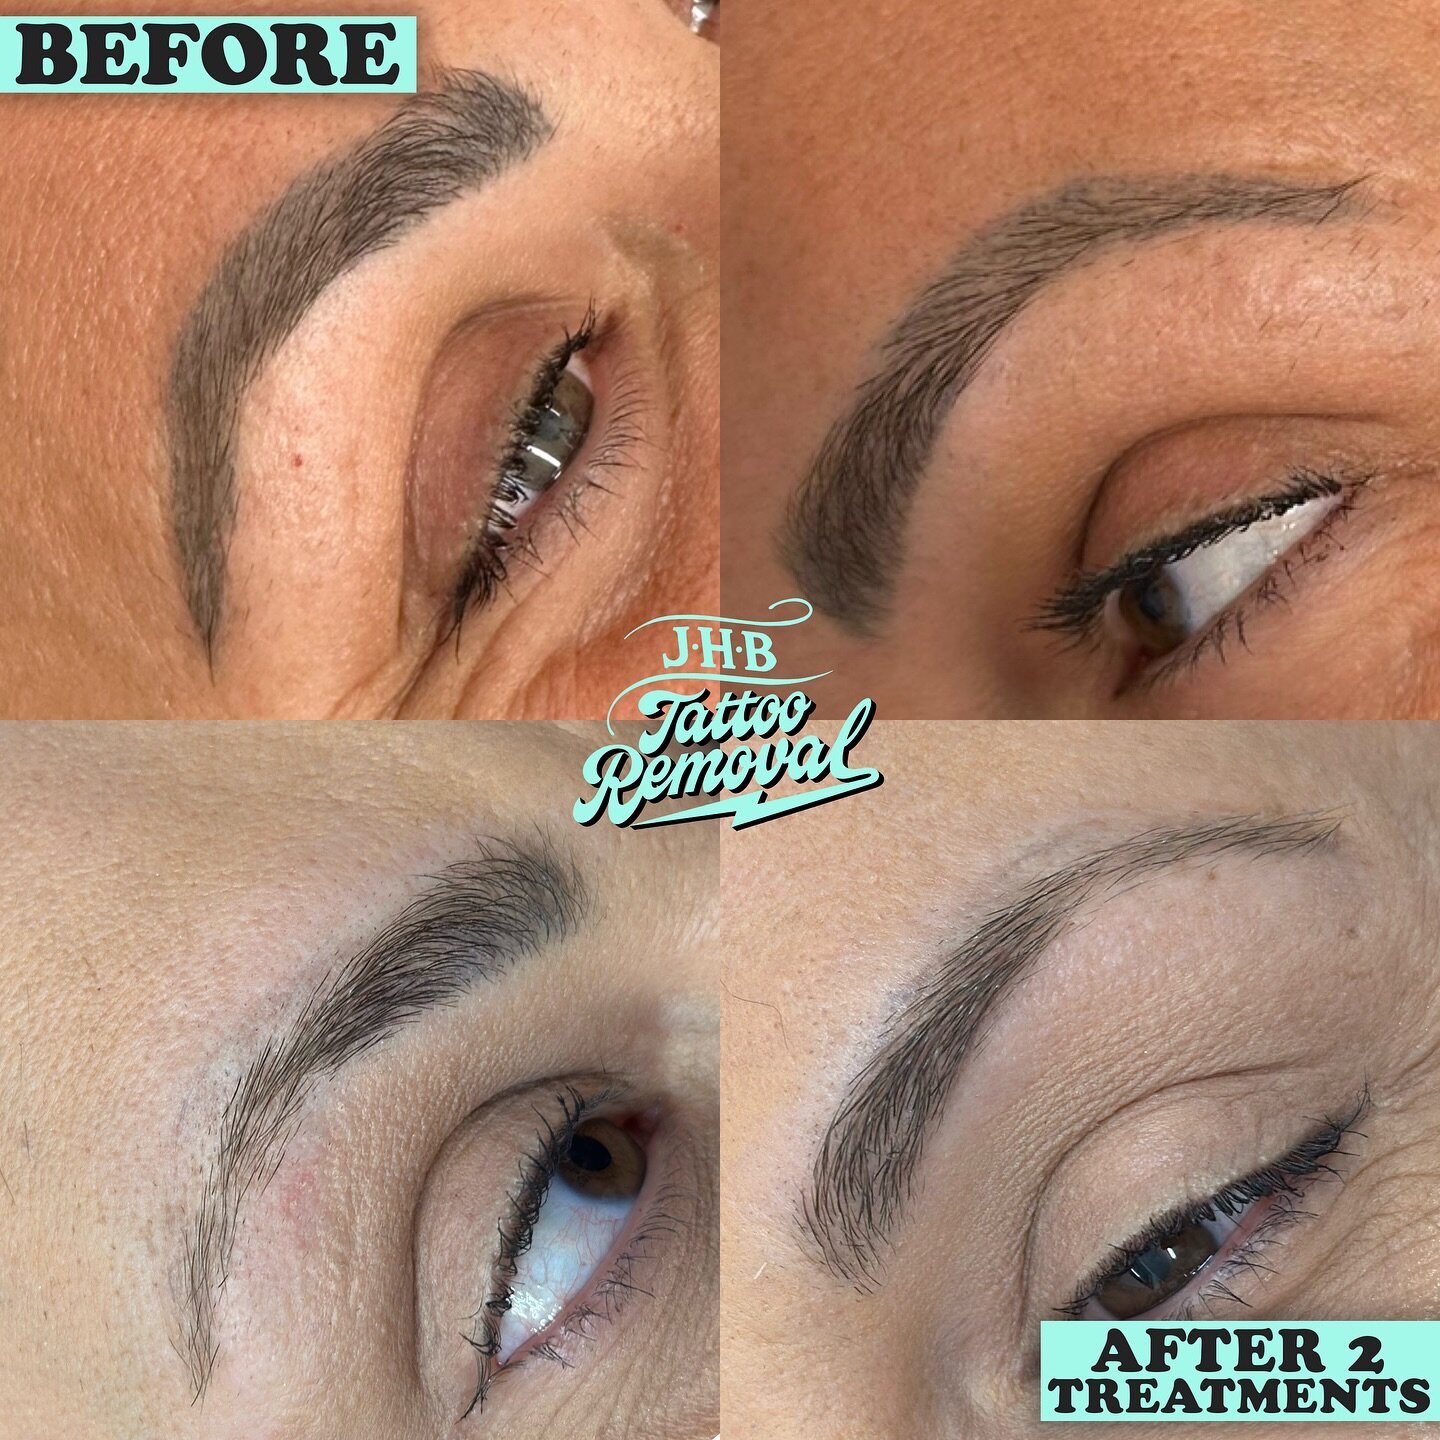 Thanks J for the trust! Nearly all done on this now after 2 passes! We did a 3rd to be safe but I&rsquo;m pretty sure that&rsquo;s the end now. Really happy with results on this. I&rsquo;m always happy to take more brows on so just reach out if you&r